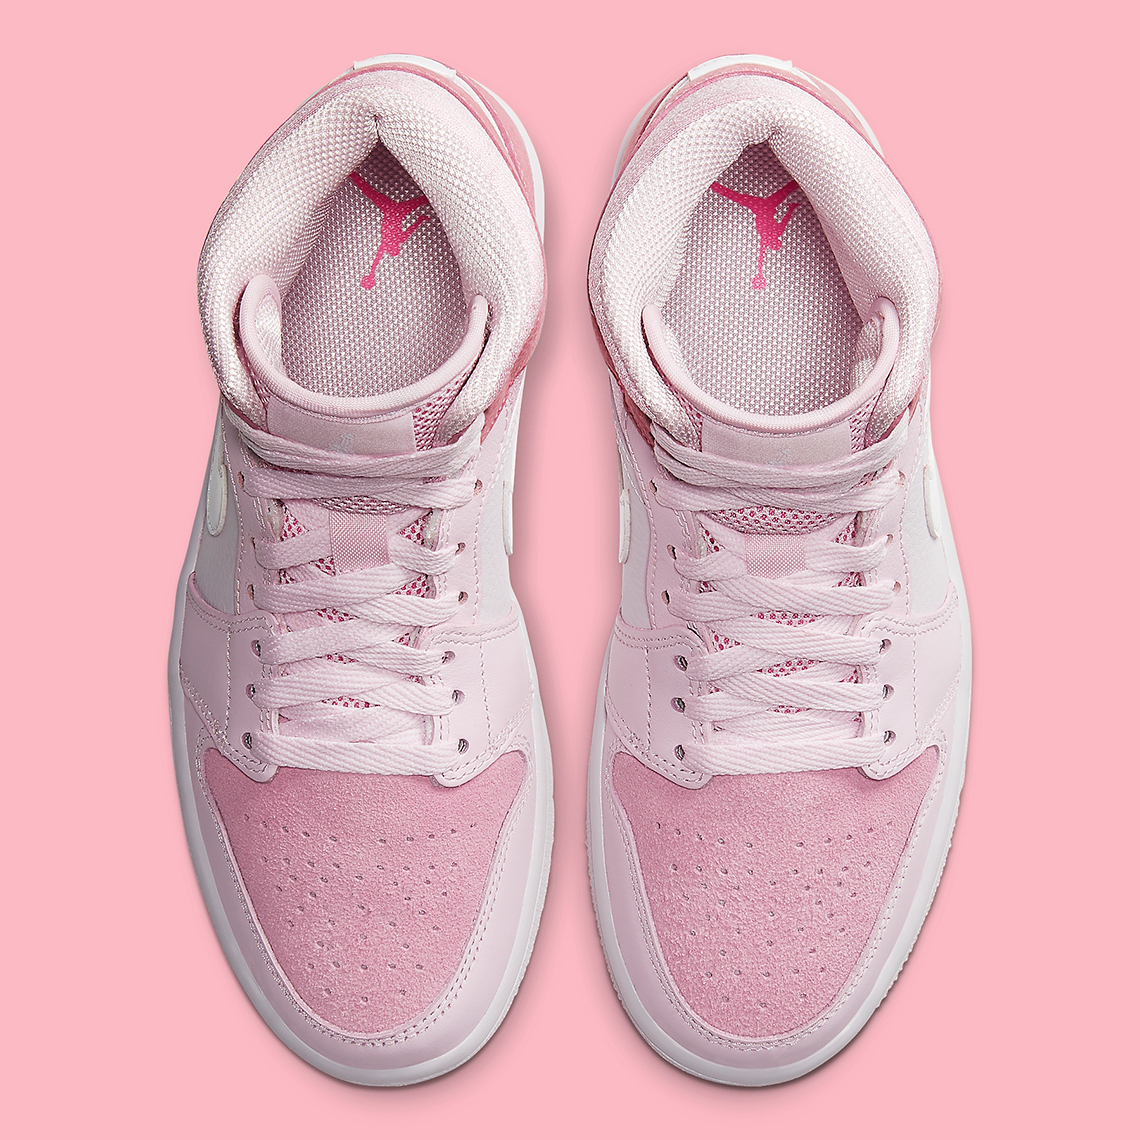 new jordans white and pink